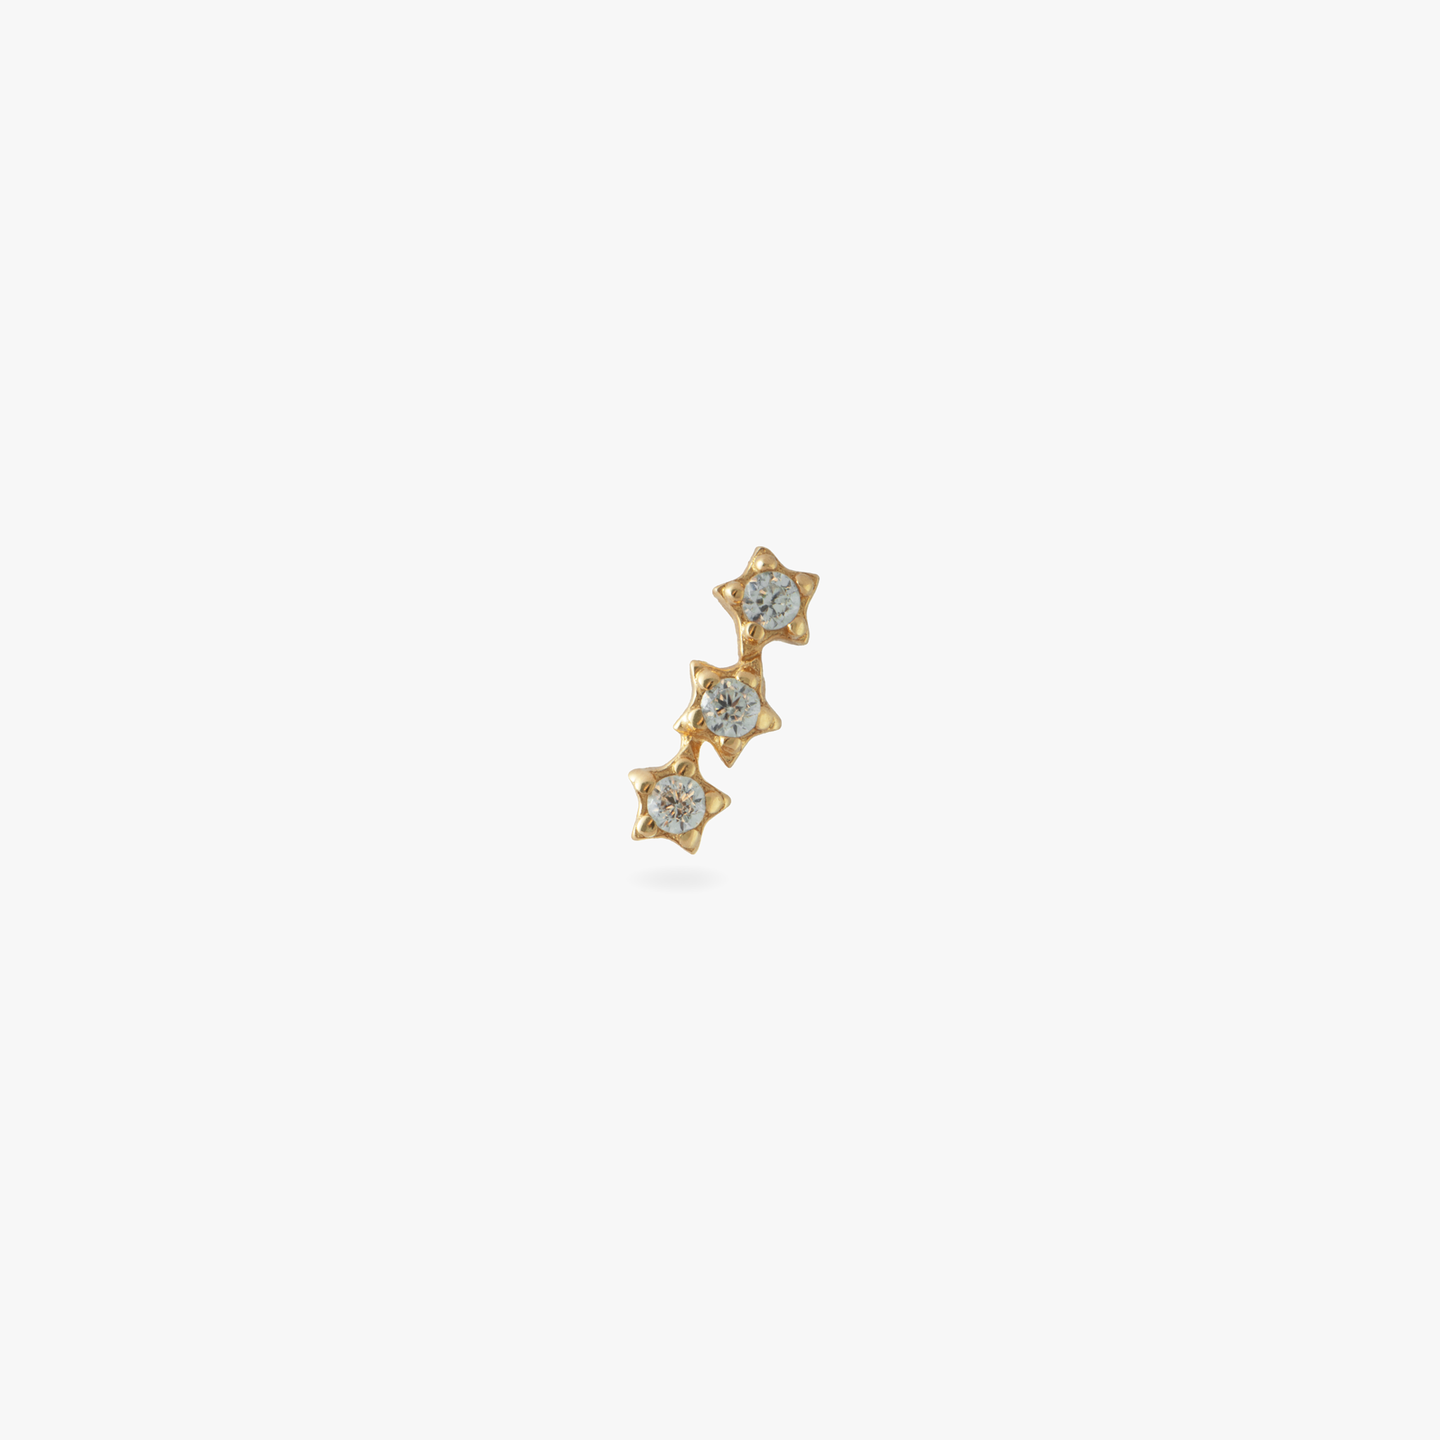 This is a 14k gold stud with 3 CZ's in a star shape color:null|gold/clear